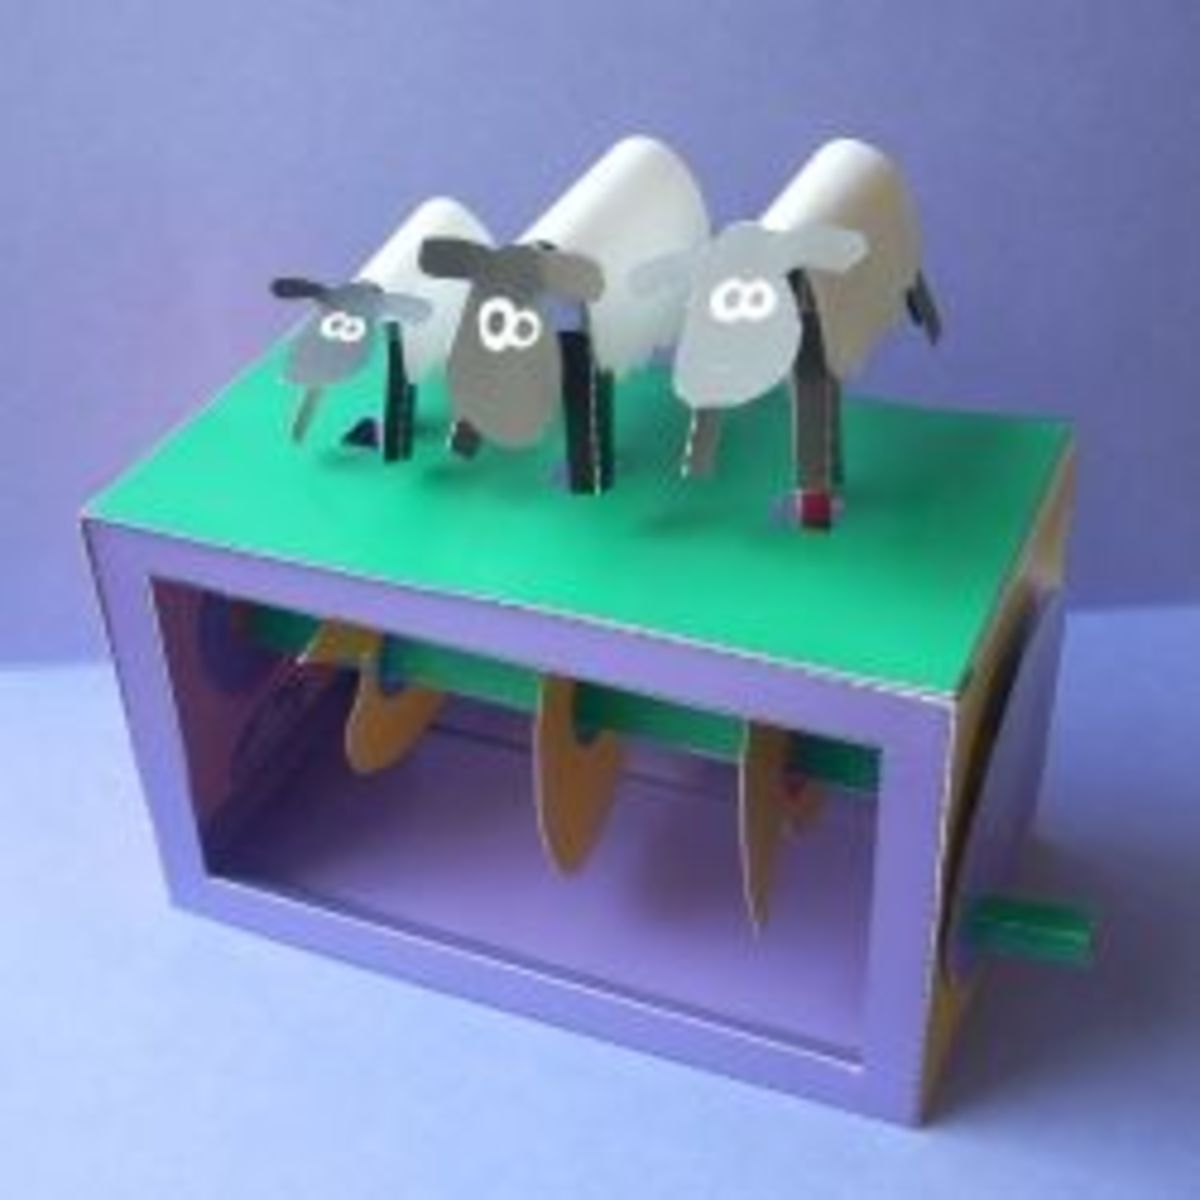 Making Paper Automata Toys With Rob Ives's Fabulous Book